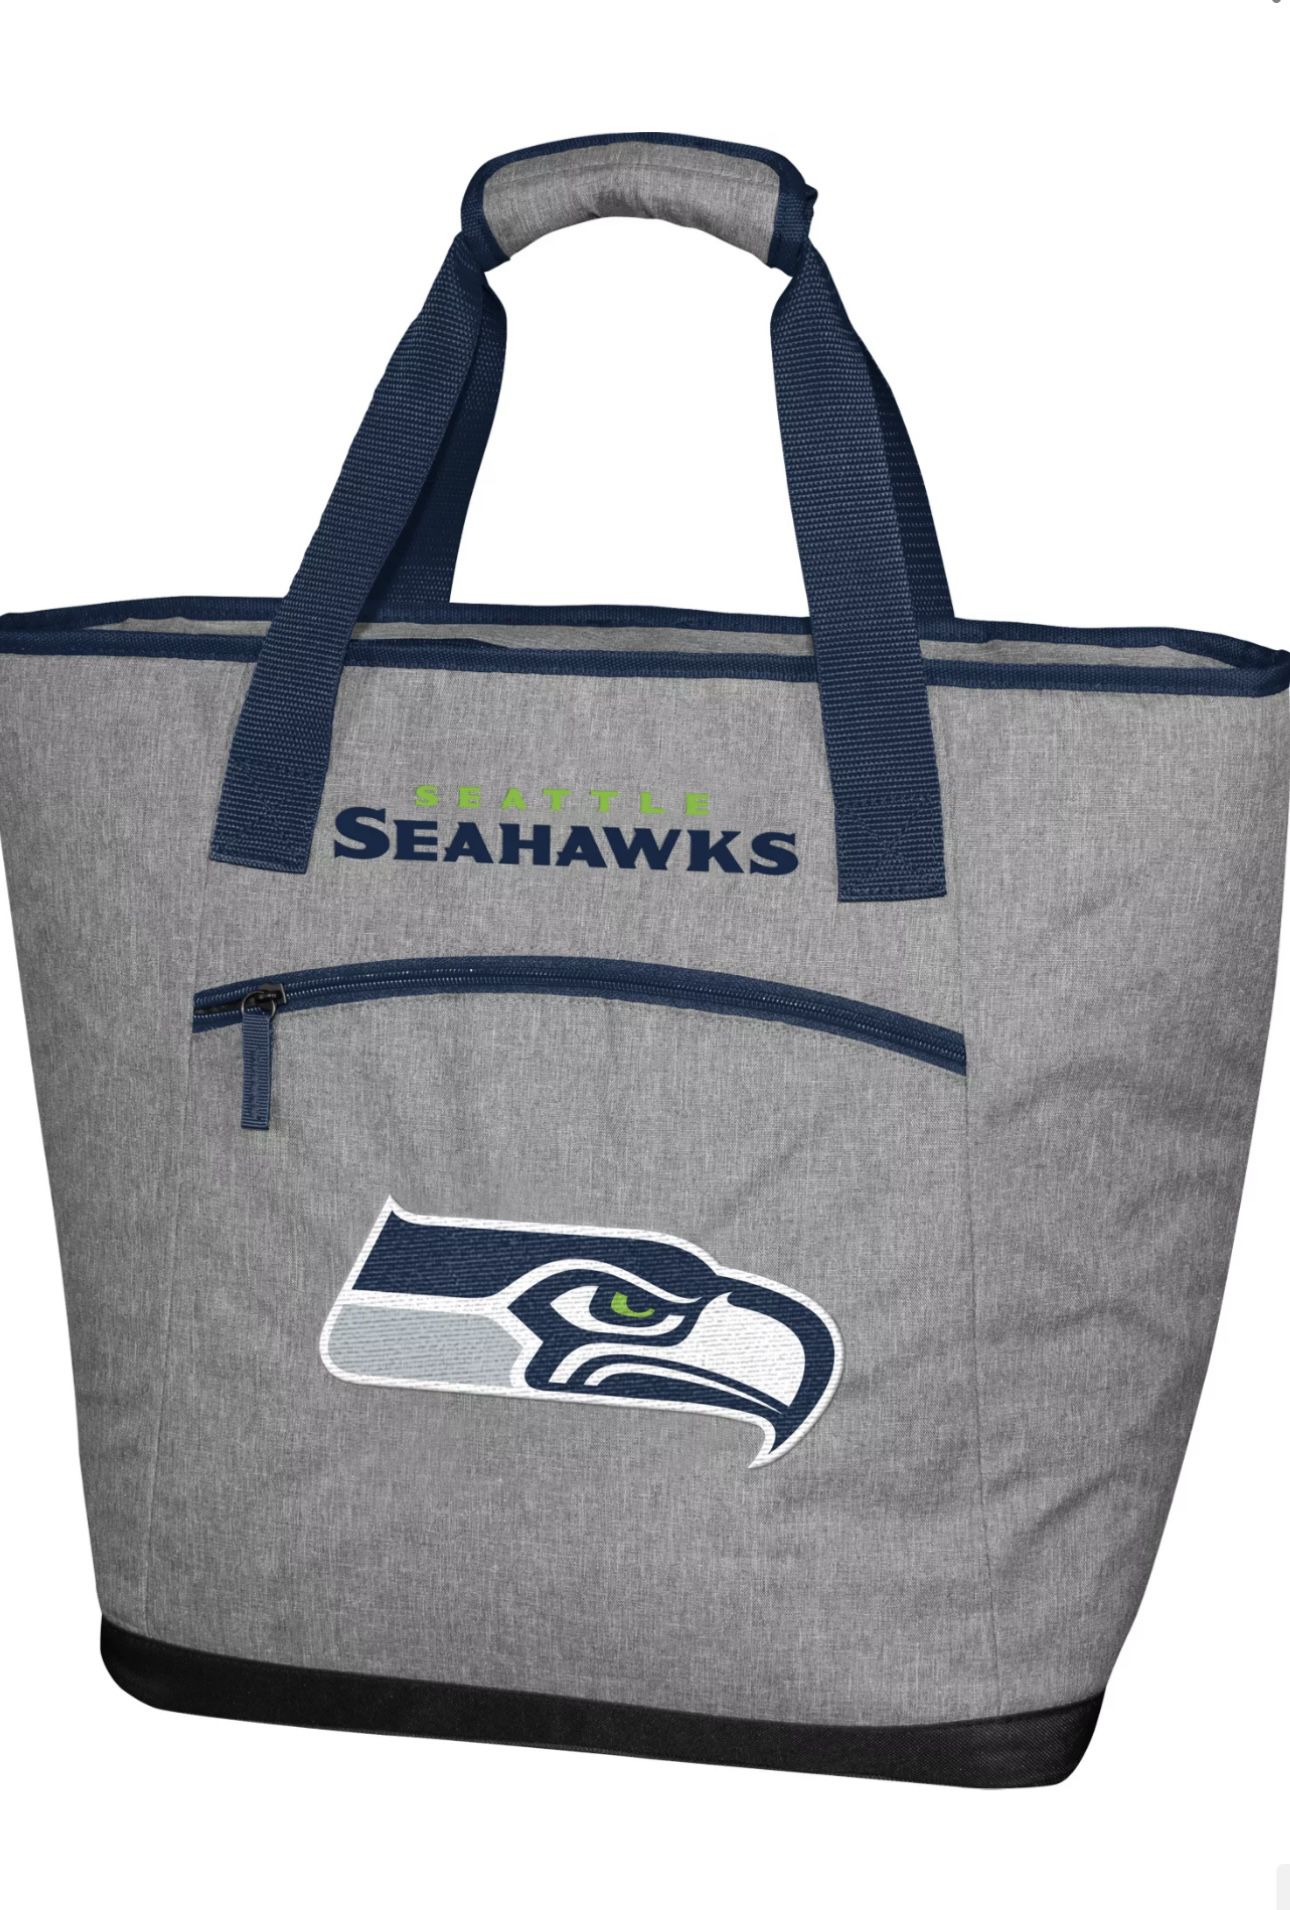 Seattle Seahawks Cooler Tote New